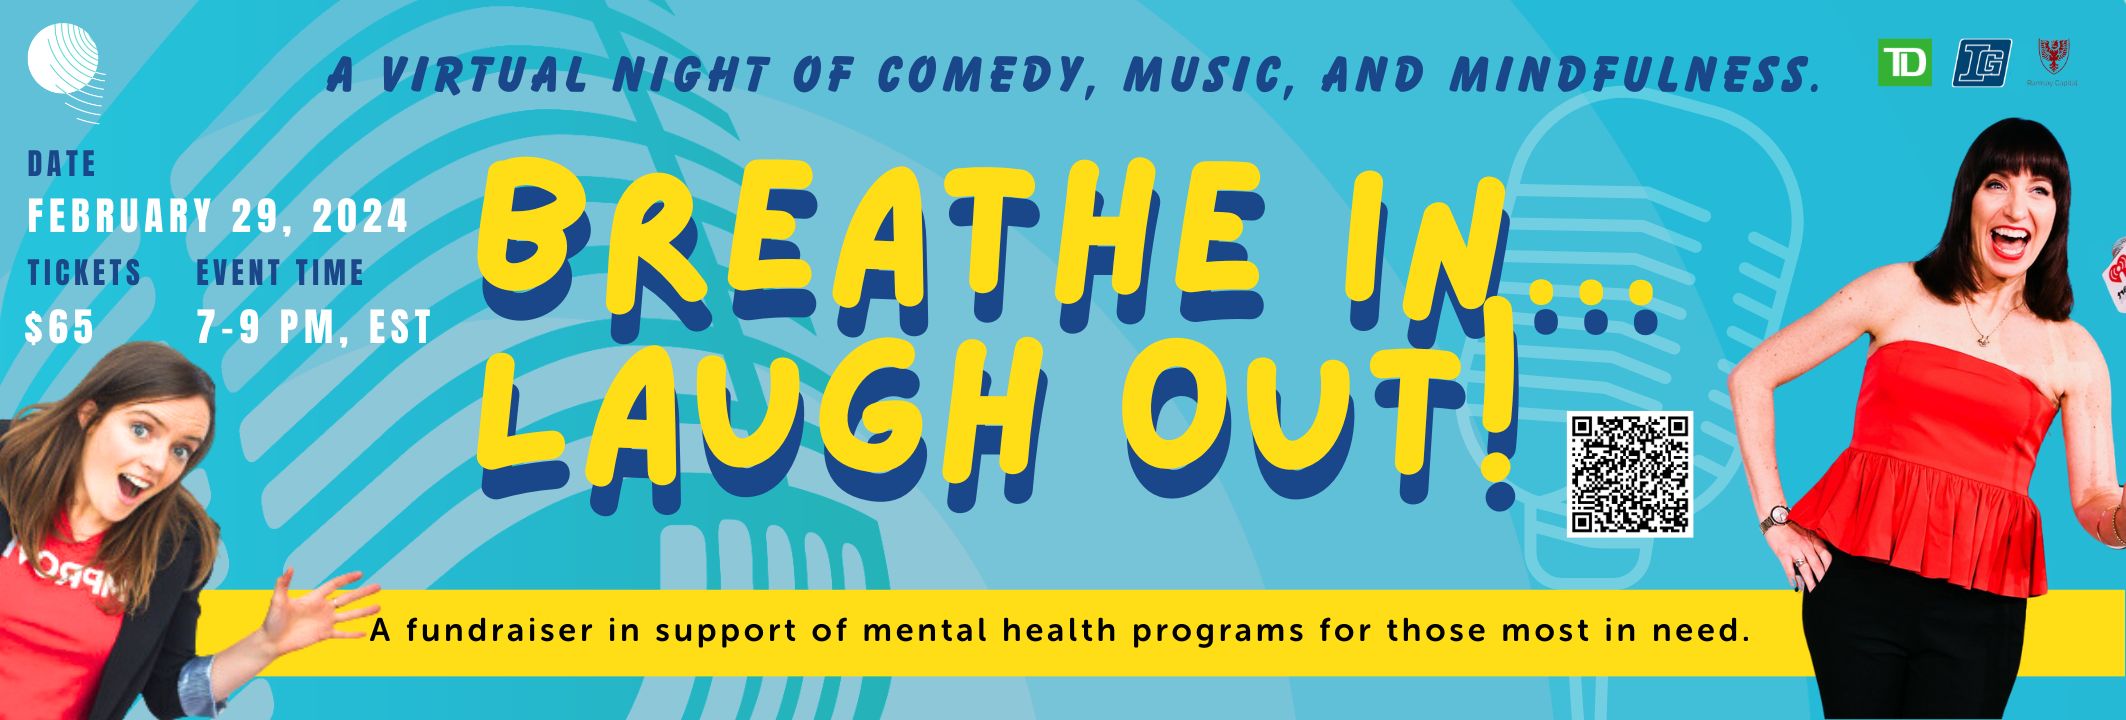 Breathe in... laugh out comedy event website banner February 2024 Ophira Eisenberg